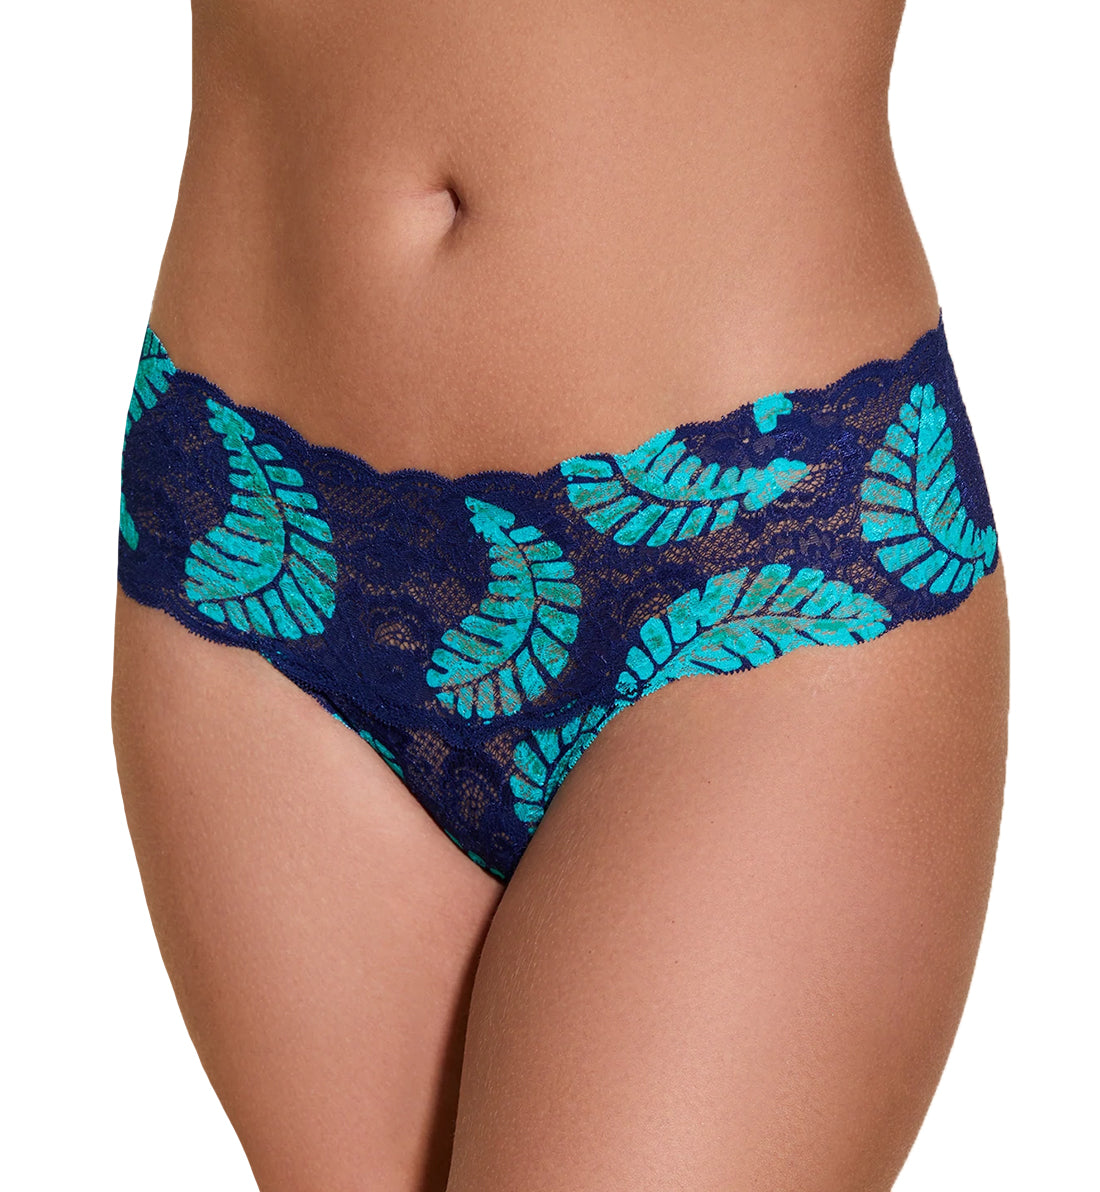 Cosabella Never Say Never Printed Comfie Thong (NEVEP0343),S/M,Leaf - Leaf,S/M